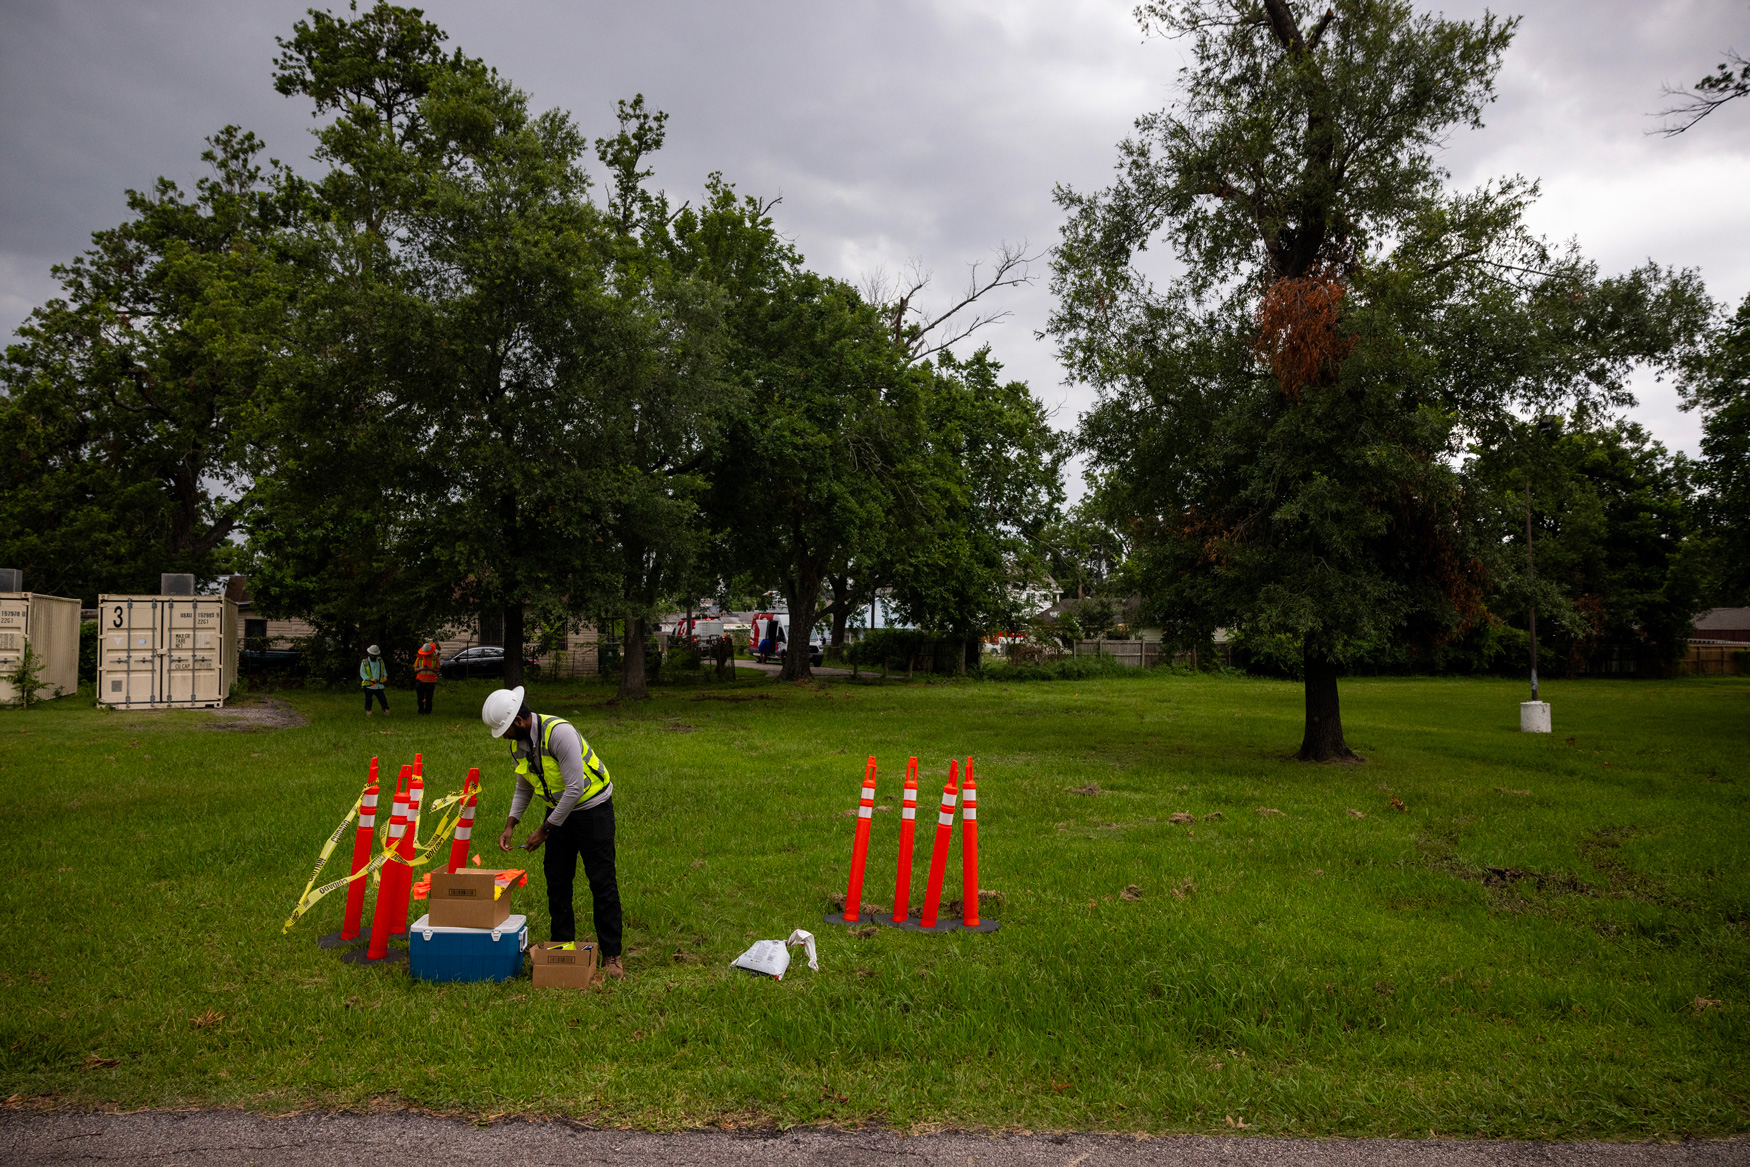 EPA, Union Pacific begin testing soil for contamination in Greater Fifth Ward